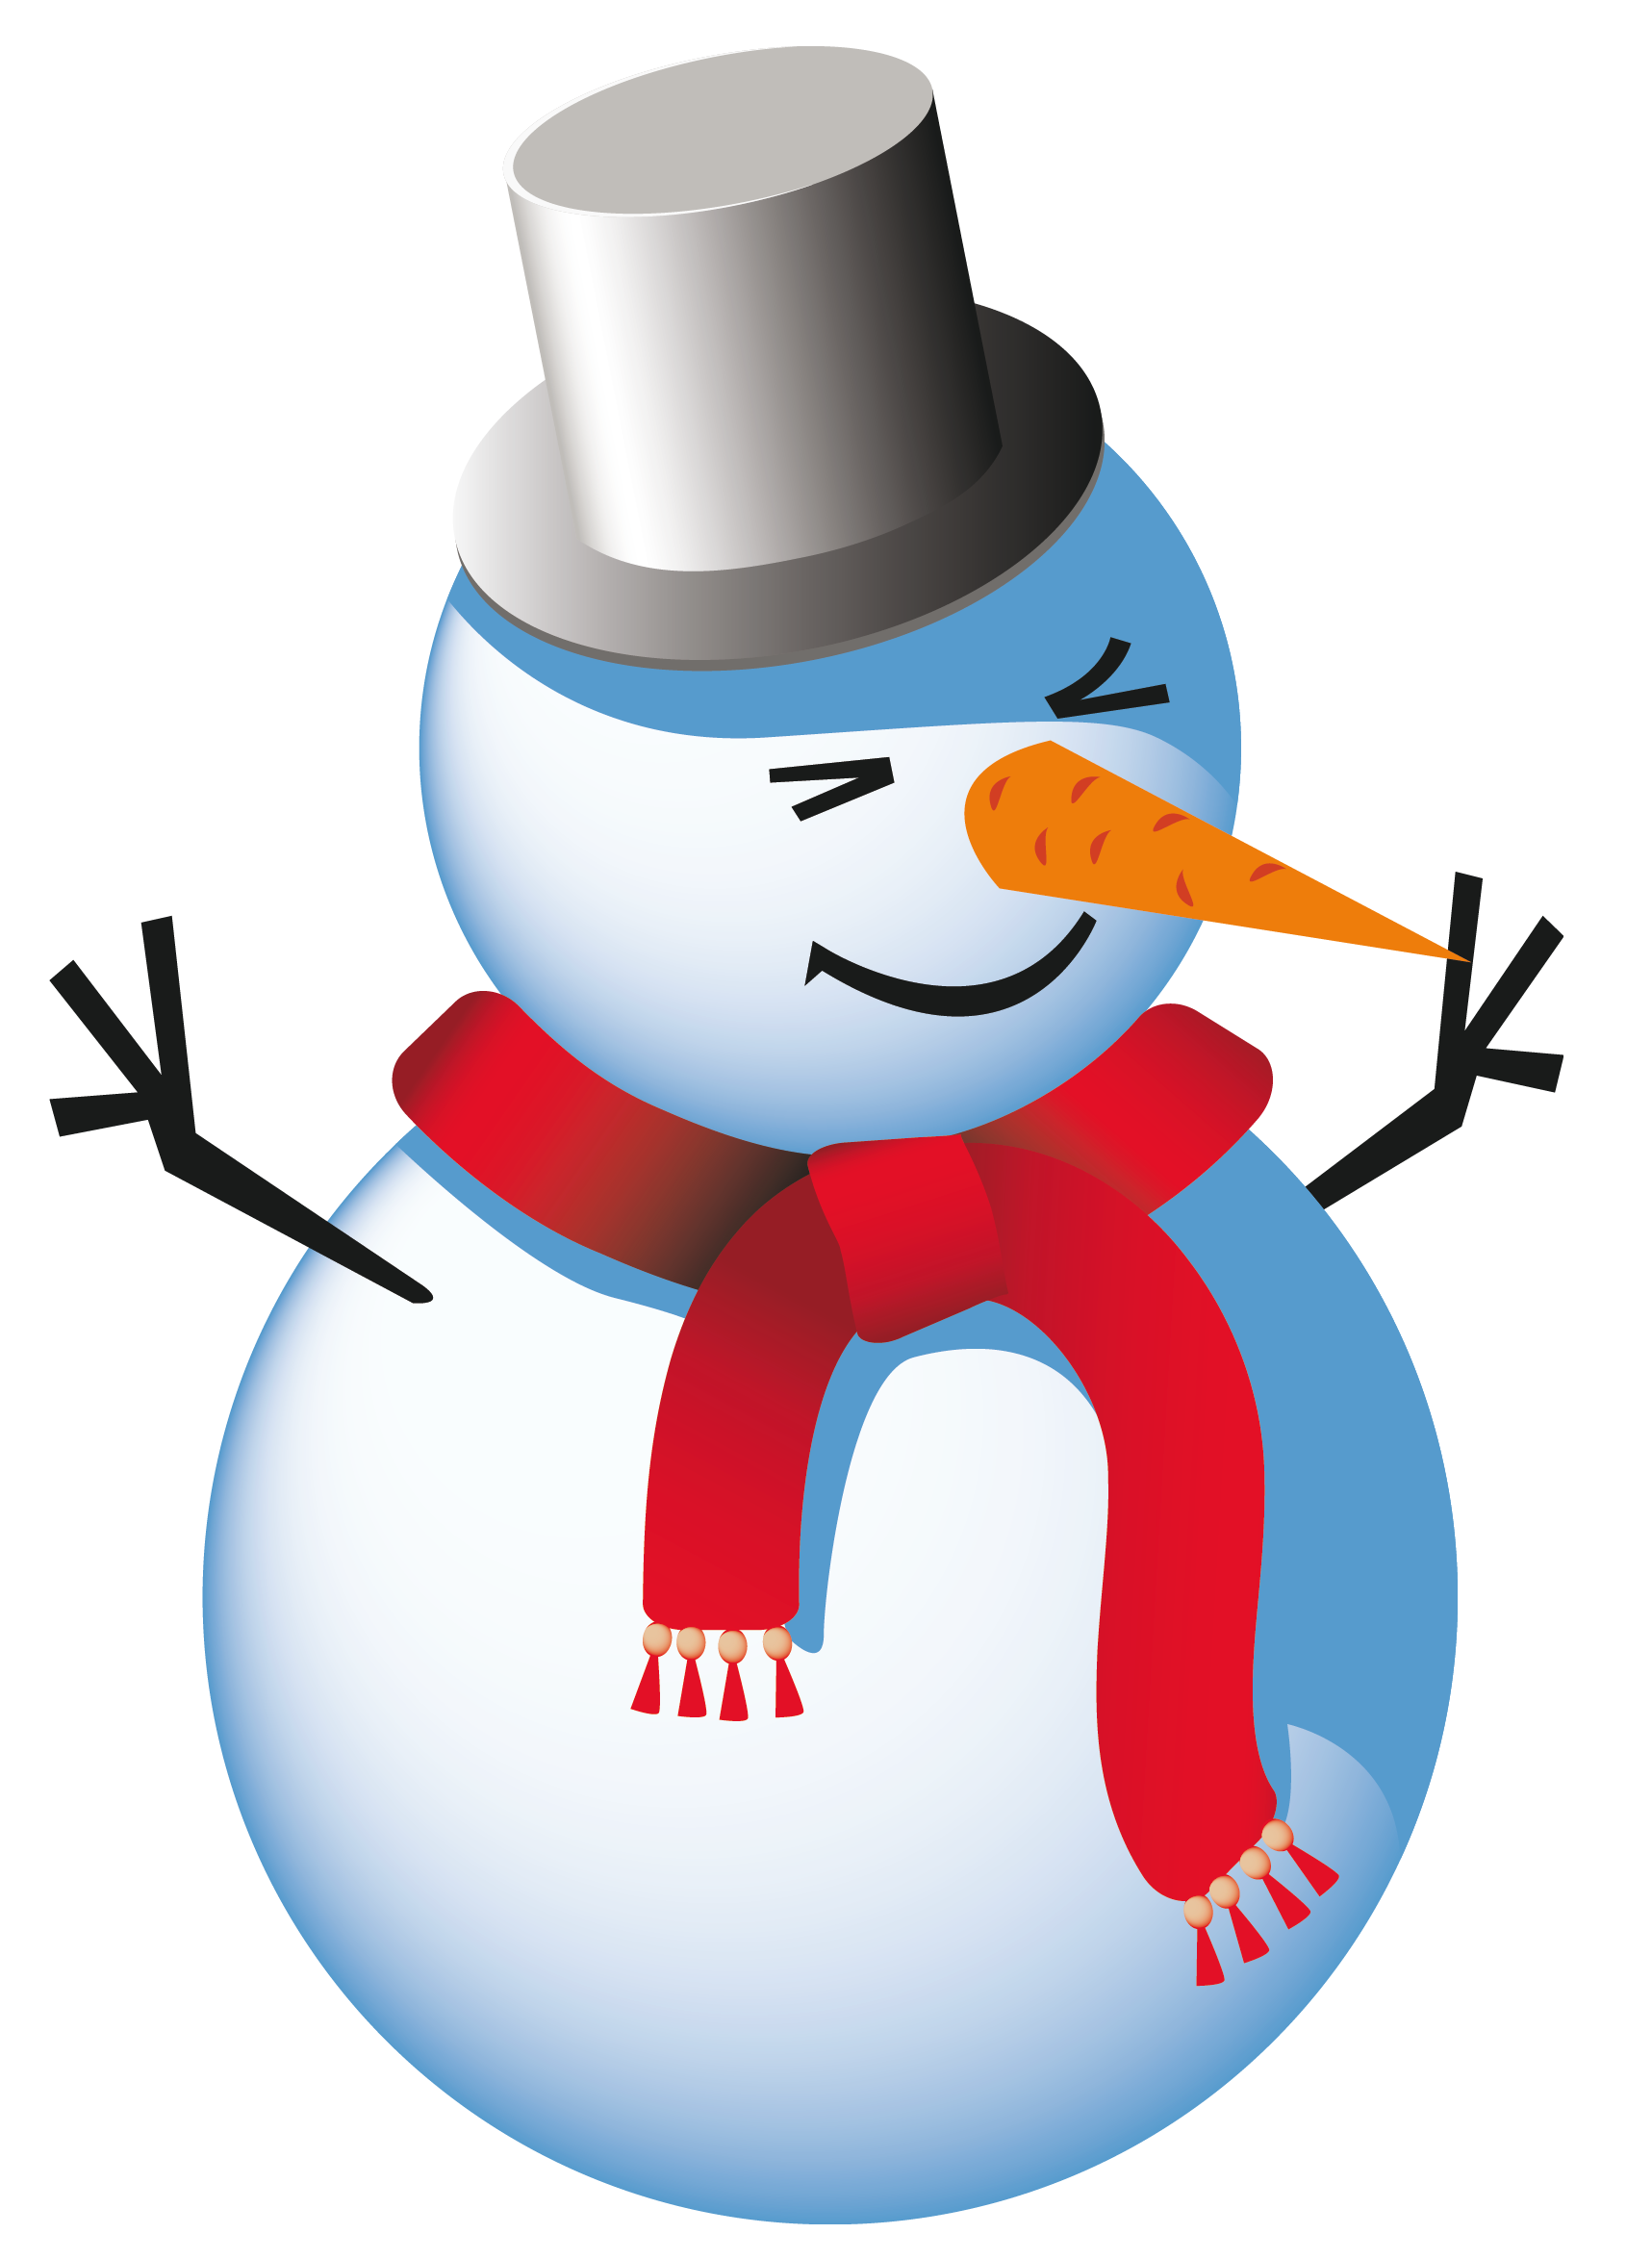 Free Snowman Image, Download Free Clip Art, Free Clip Art on Clipart